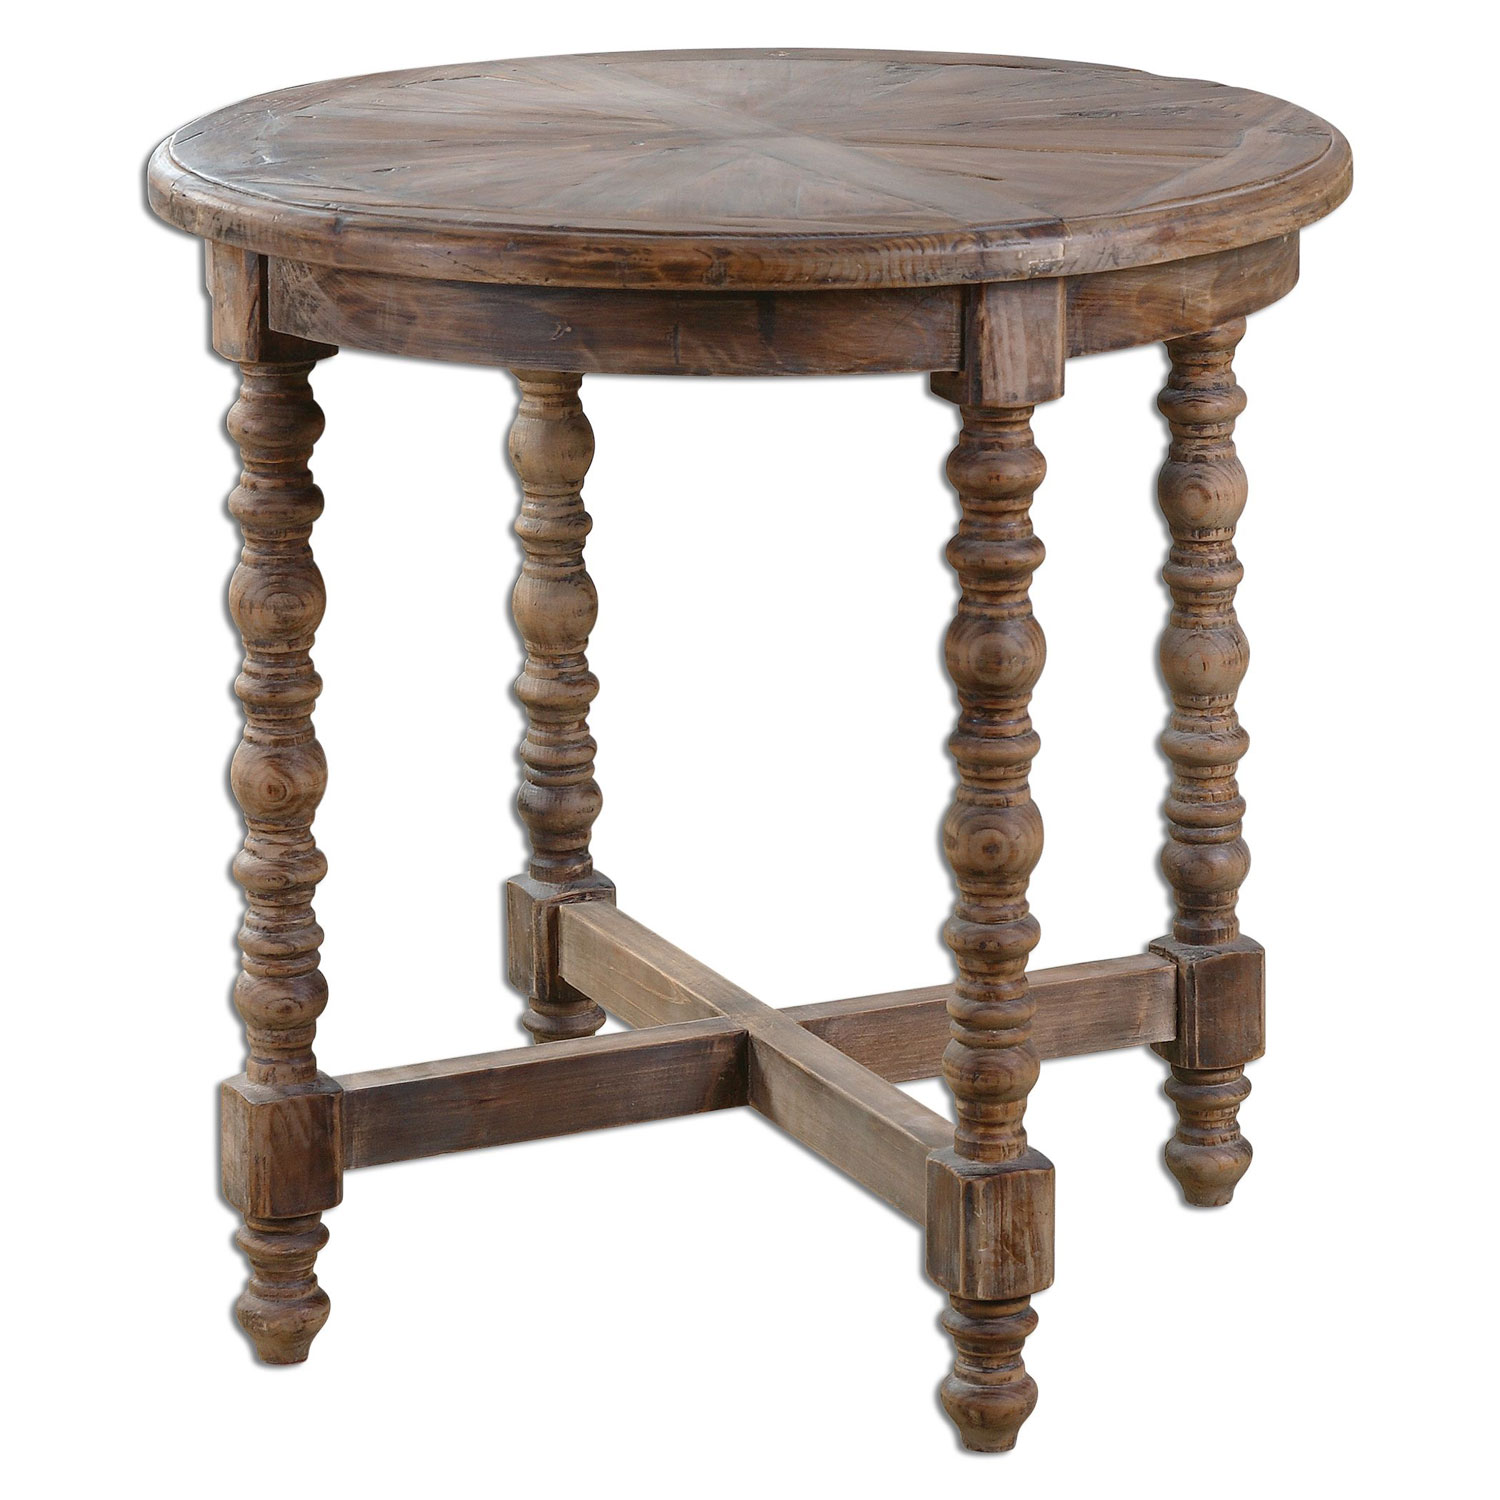 uttermost samuelle reclaimed fir wood end table bellacor antique wooden accent hover zoom small marble yellow home accents extra long narrow console round cocktail brown wicker